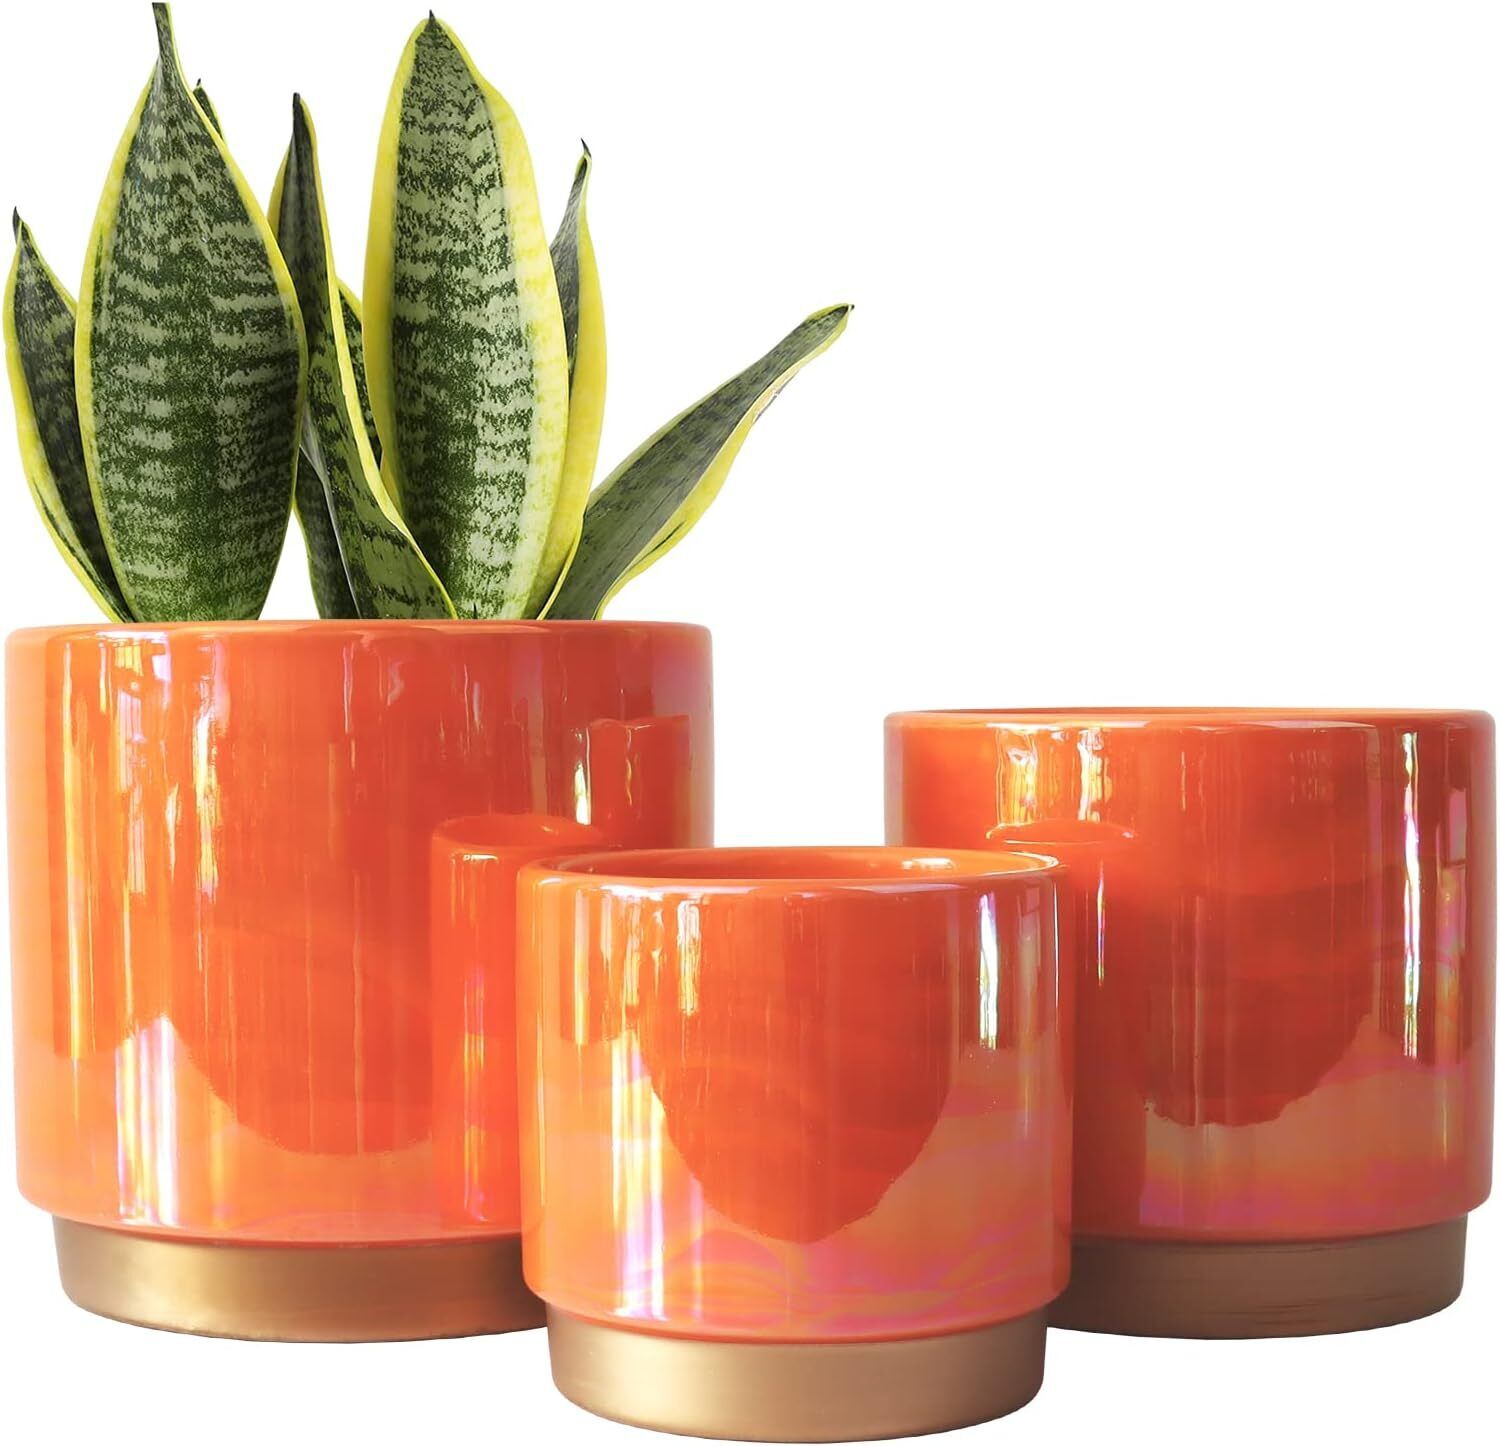 Ceramic Indoor Pots for Plants,New free freight